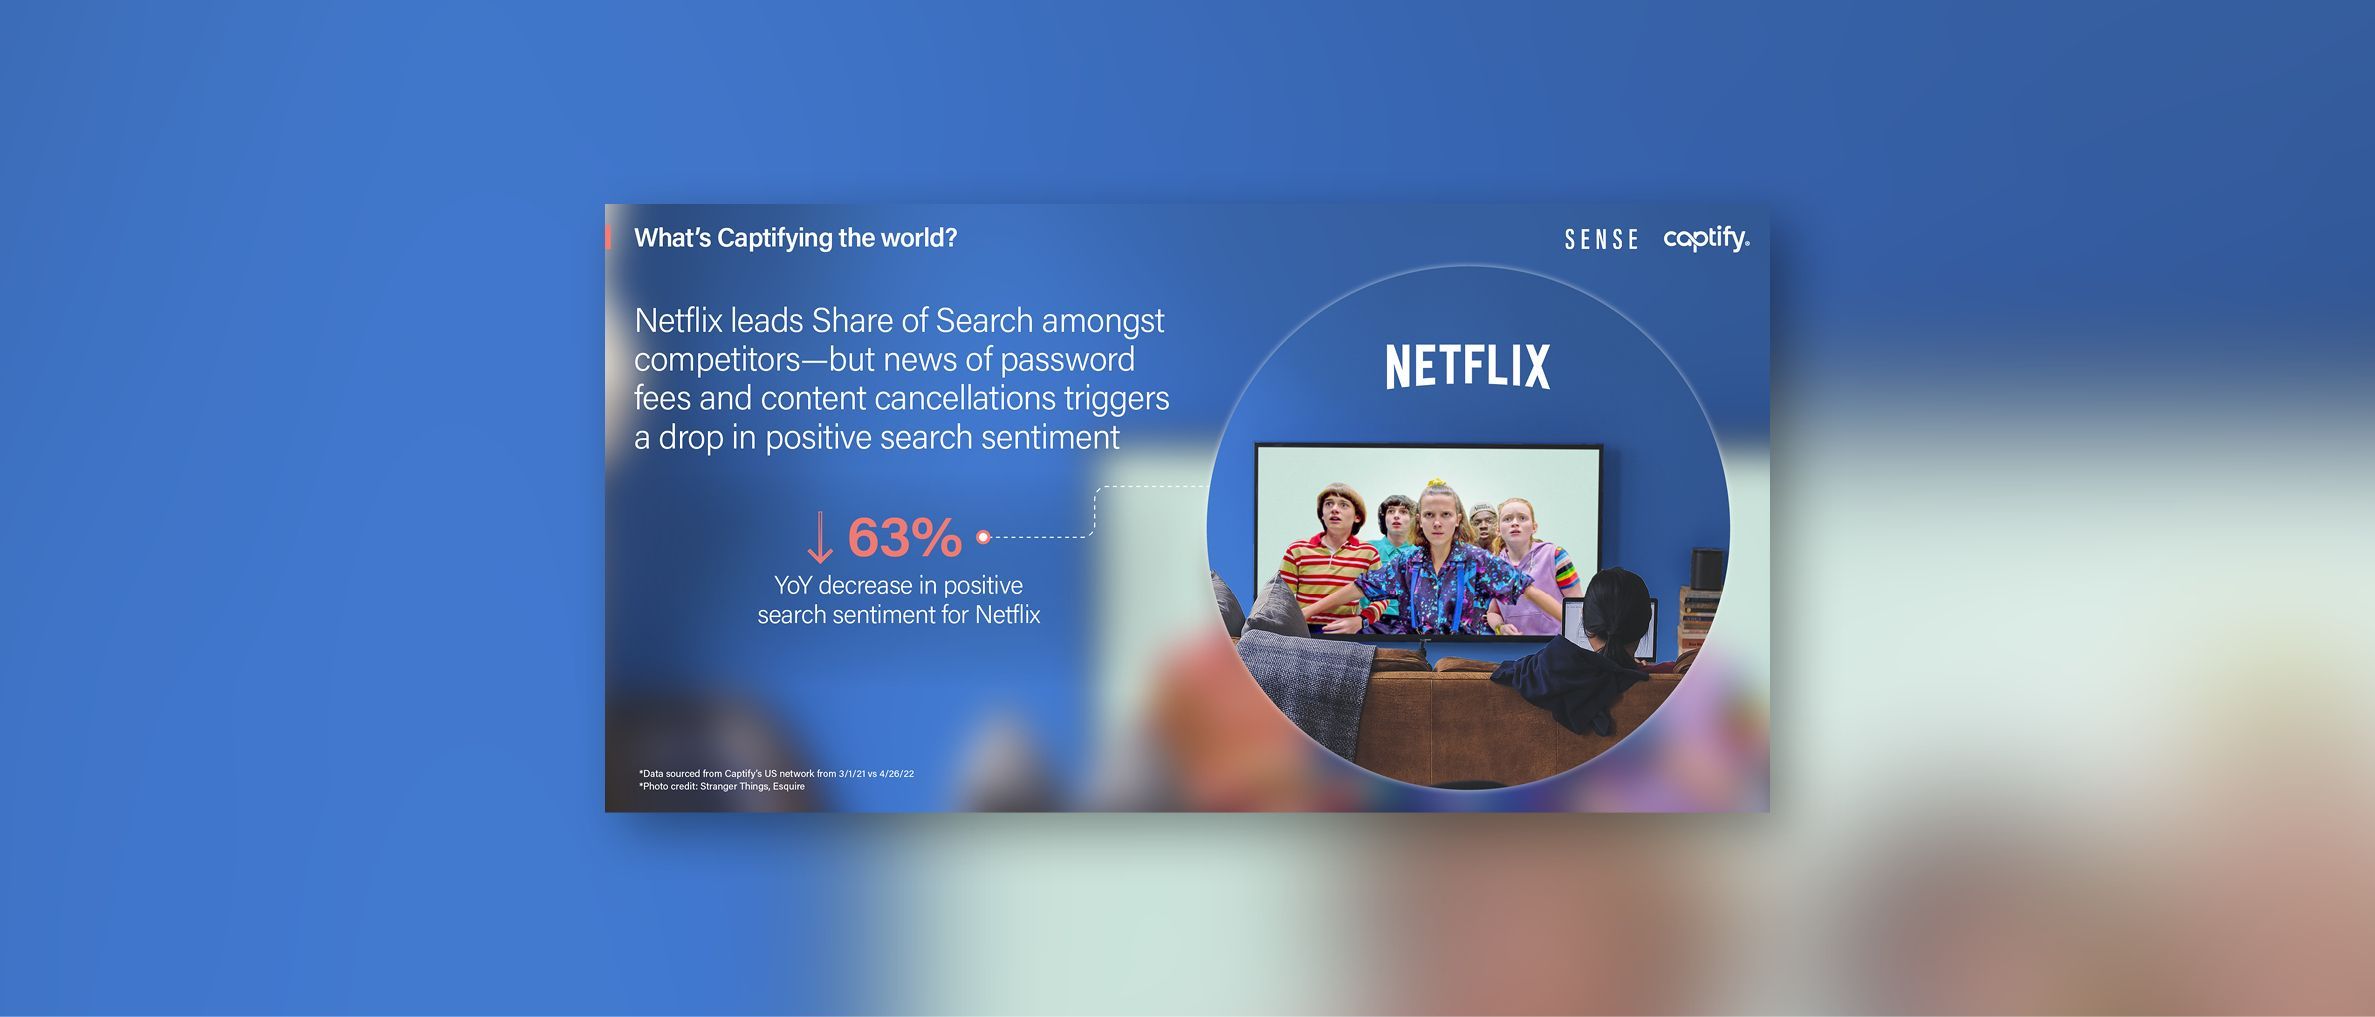 What’s Captifying the World: Netflix Leads Share of Search Amongst Competitors — But News of Password Fees and Content Cancellations Triggers a Drop In Positive Search Sentiment